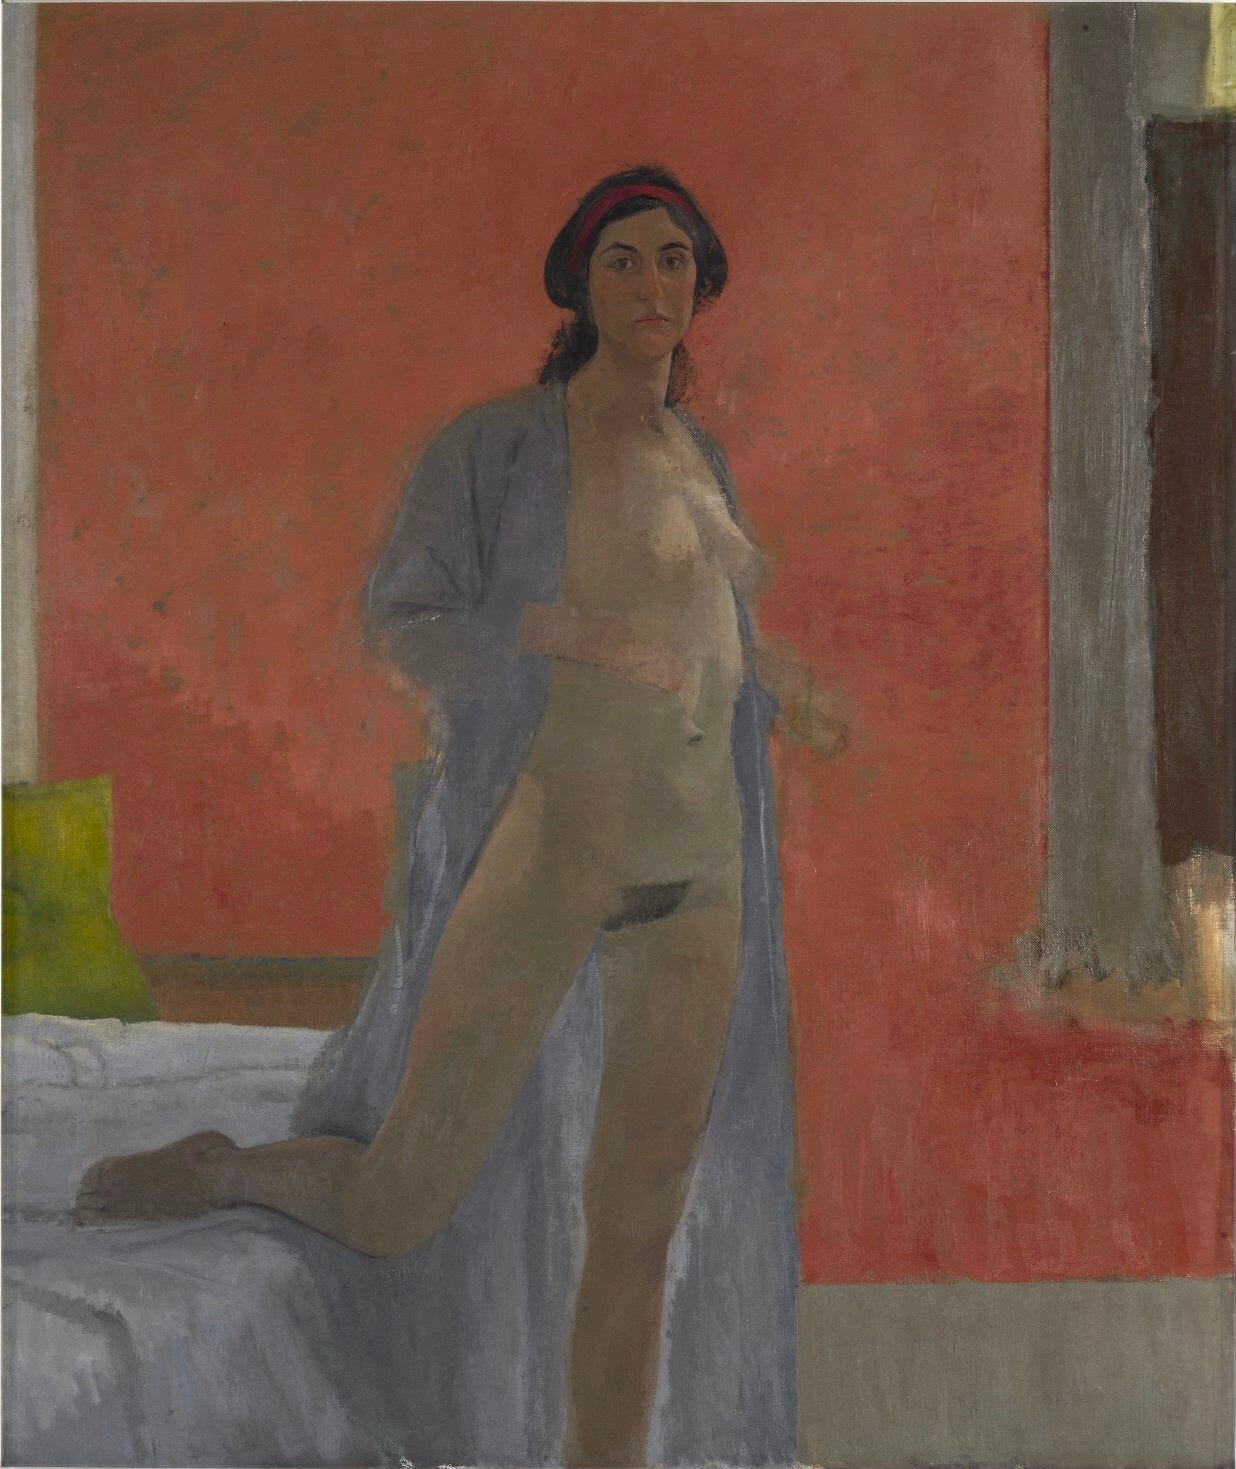 A standing nude woman draped in a blue robe.